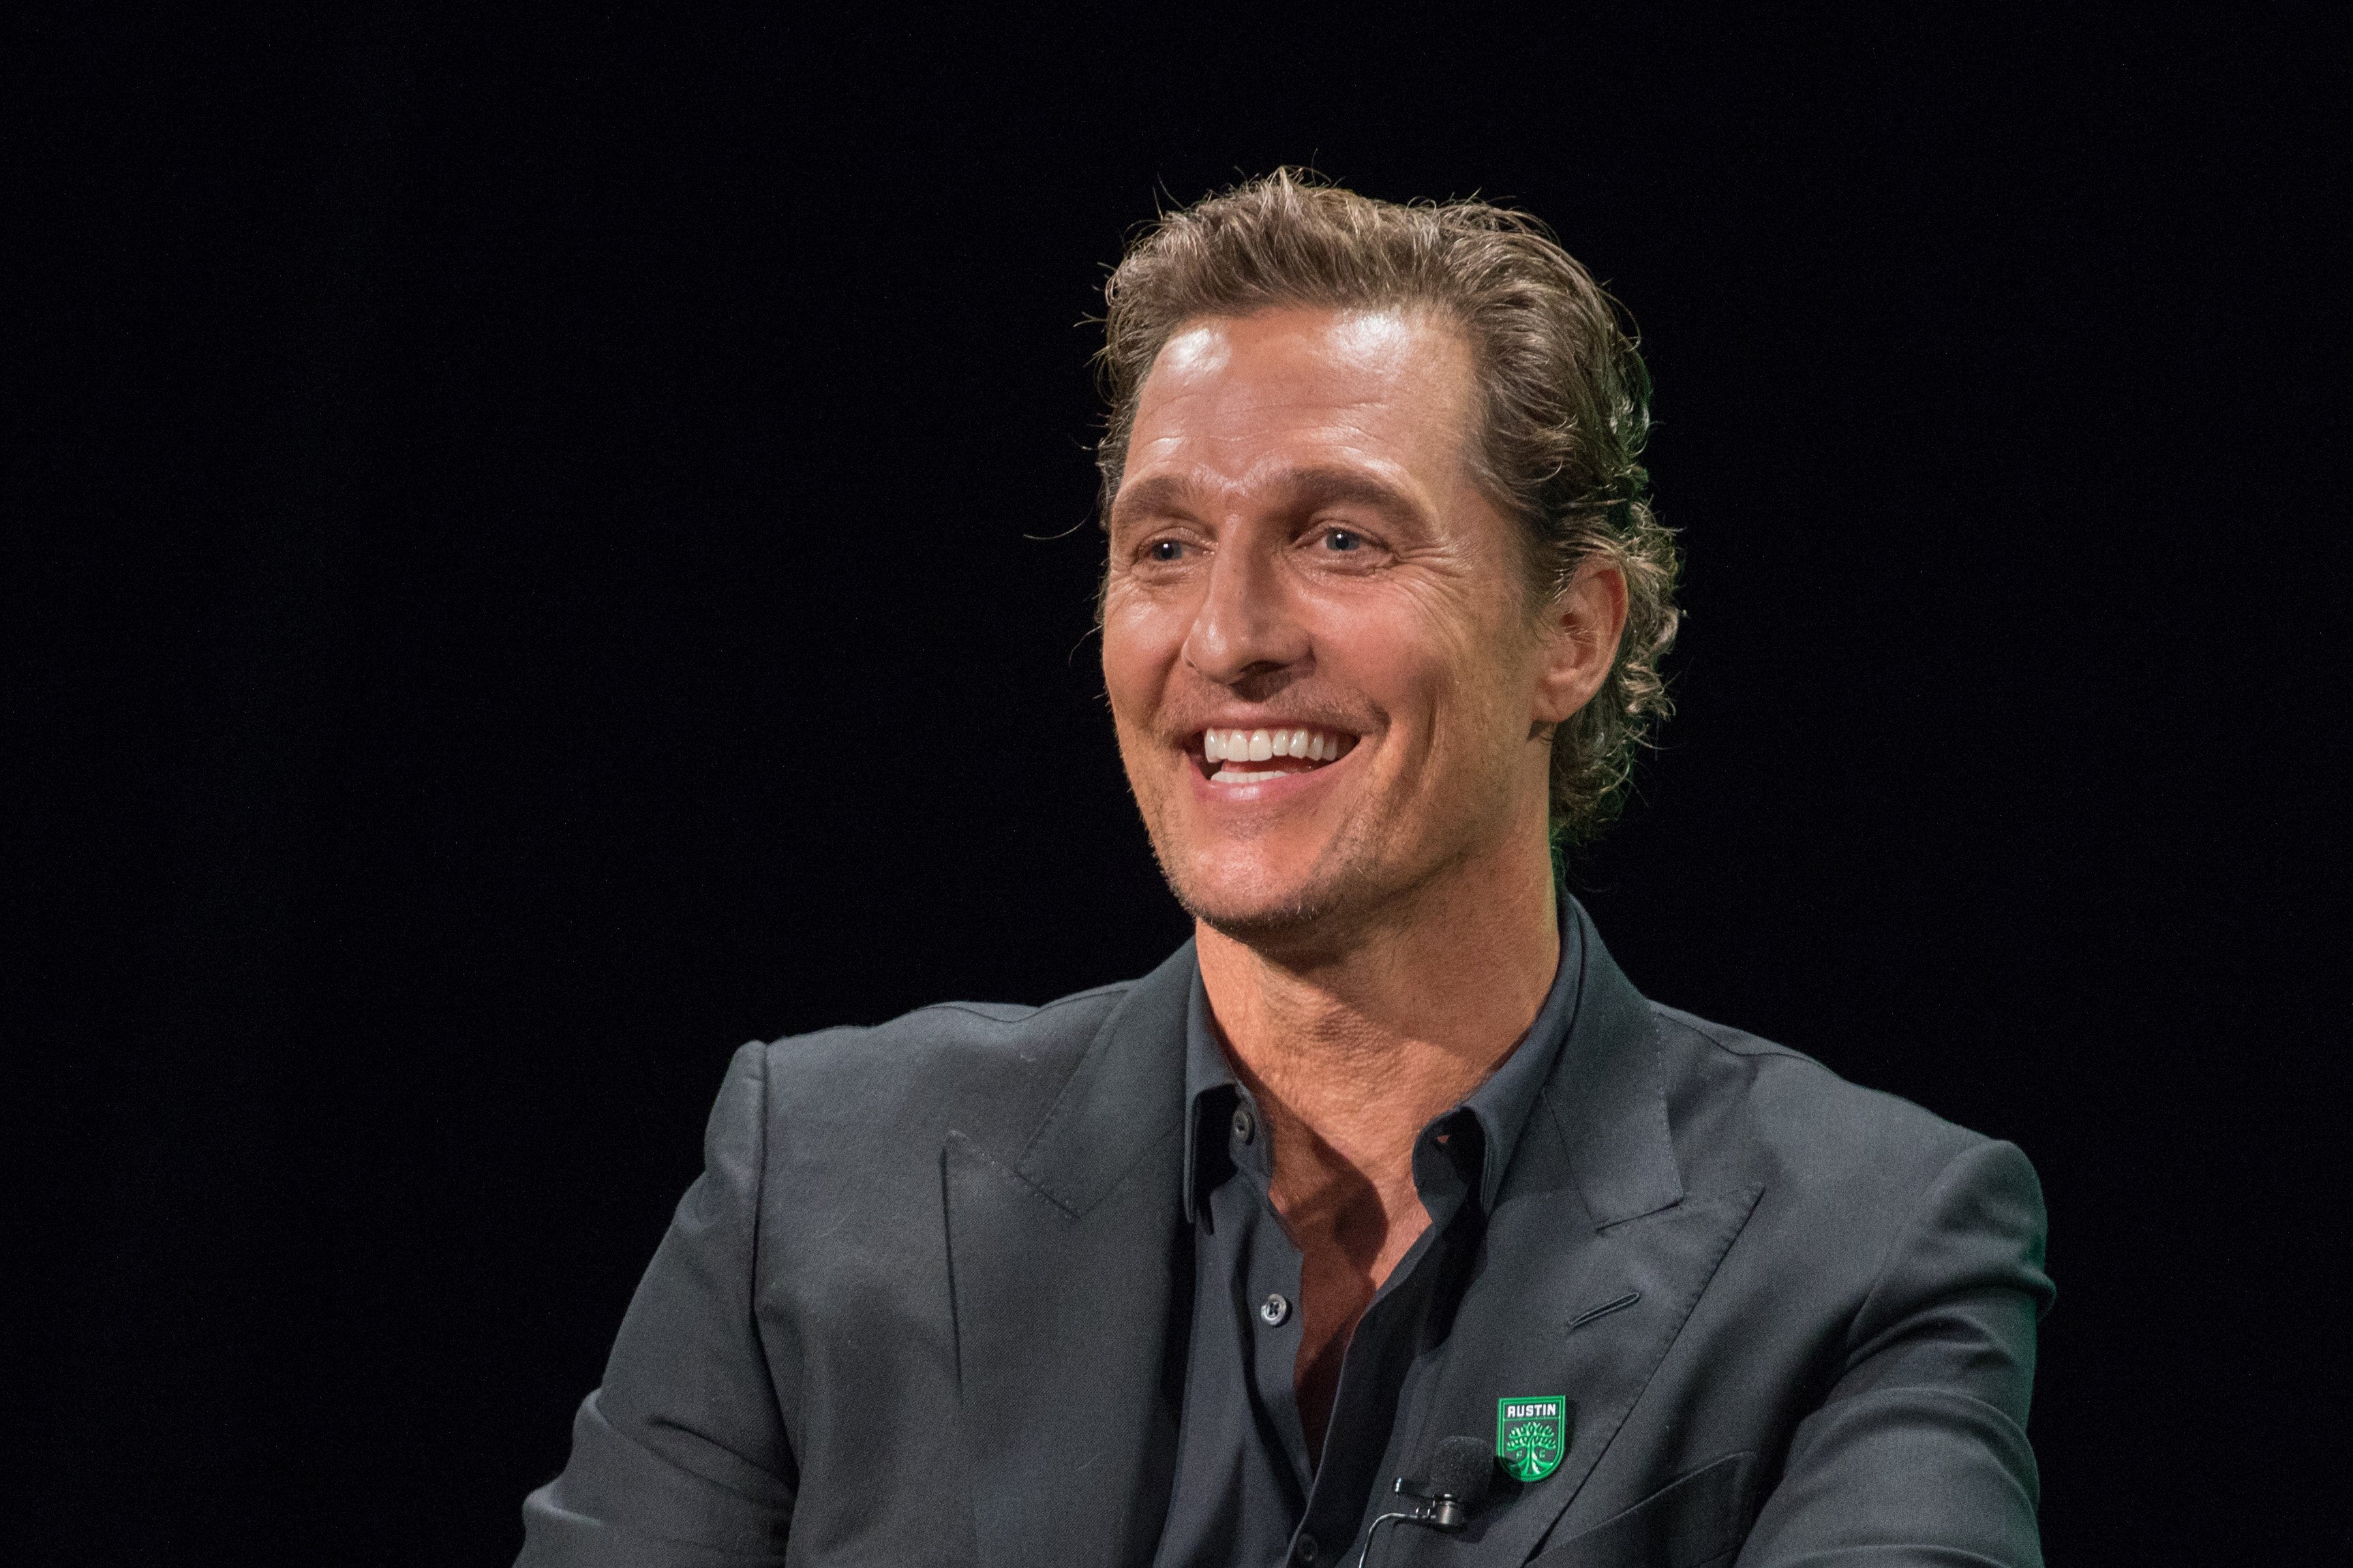 Matthew McConaughey, Academy Award-winning actor attends the Austin FC Major League Soccer club announcement of four new investors including himself as the 'Minister of Culture' at 3TEN ACL Live on August 23, 2019 in Austin, Texas.| Source: Getty Images